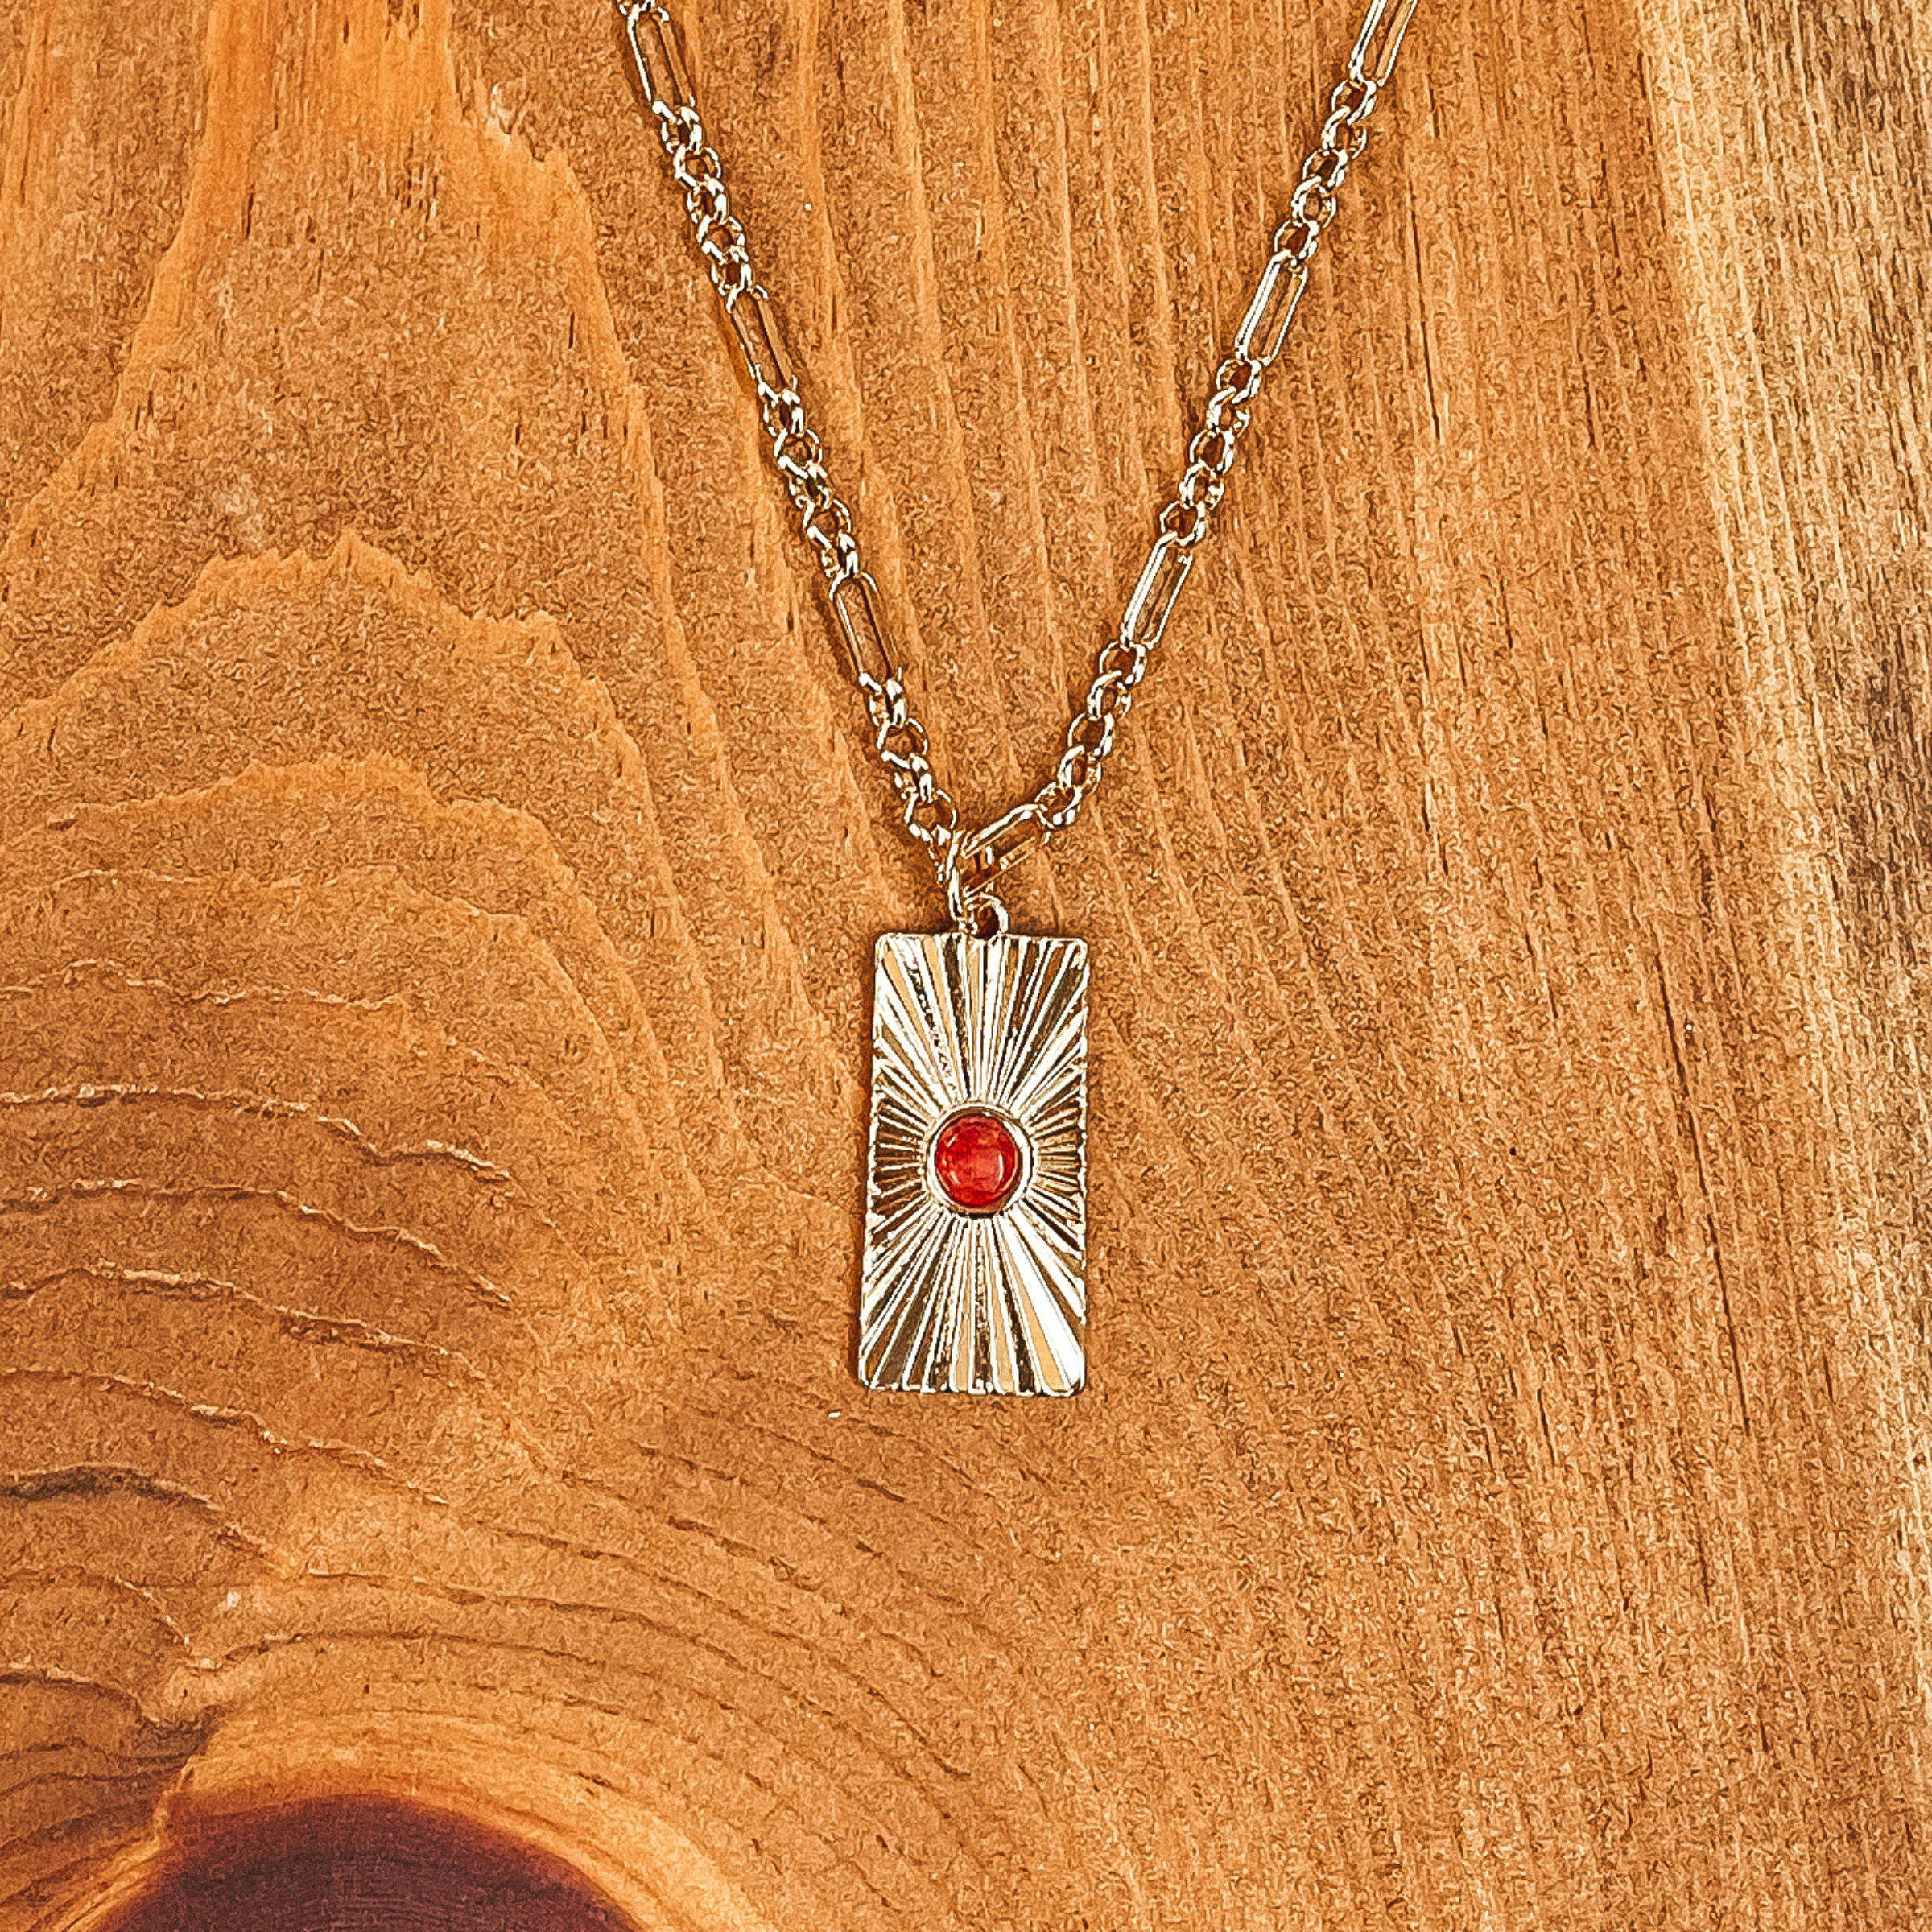 Convince Me Gold Necklace with Sunburst Rectangle Pendant and Small Stone in Red - Giddy Up Glamour Boutique